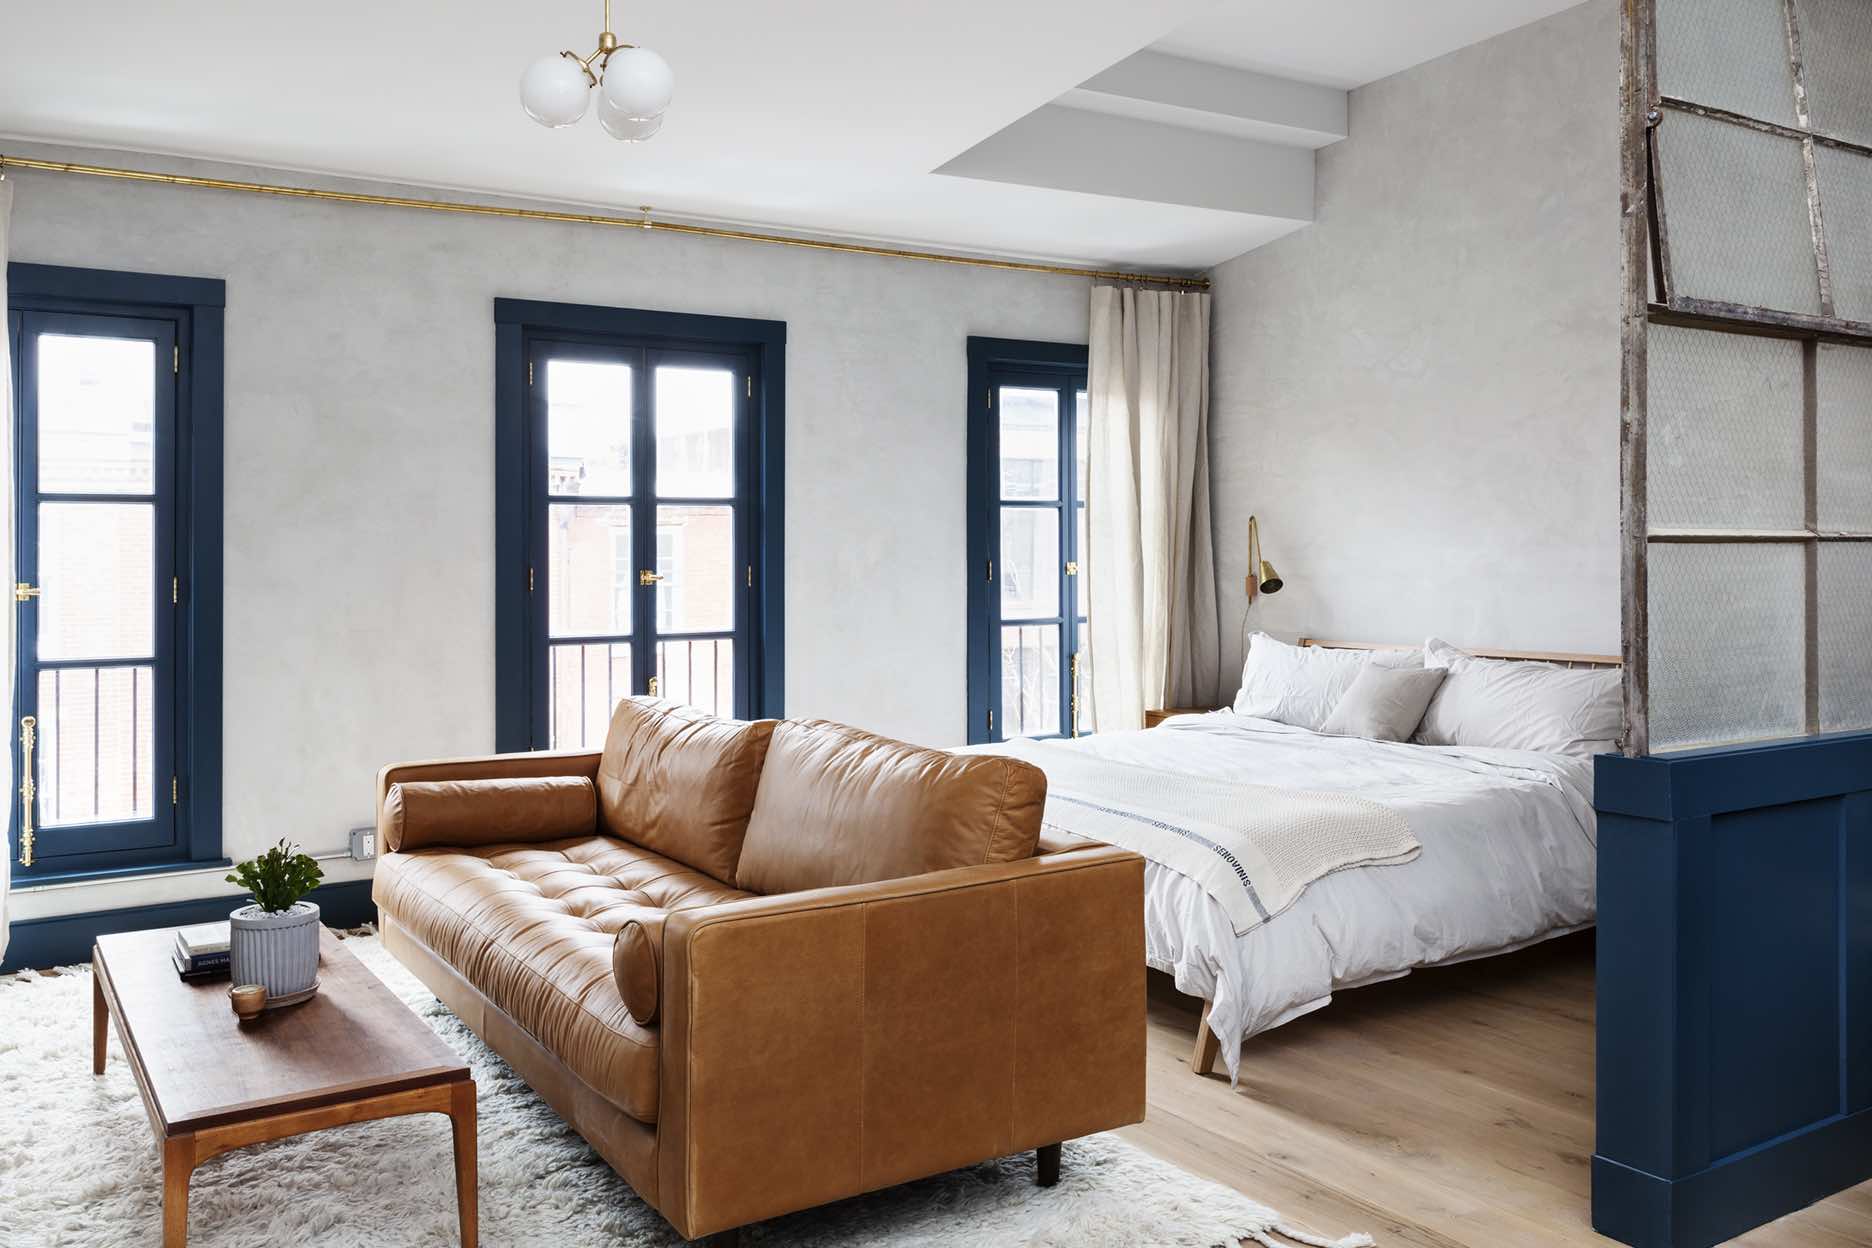 Large top floor suite at Lokal Hotel Old City with three floor to ceiling operable historic windows a king bed a leather couch and vintage coffee table on top of a plush area rug